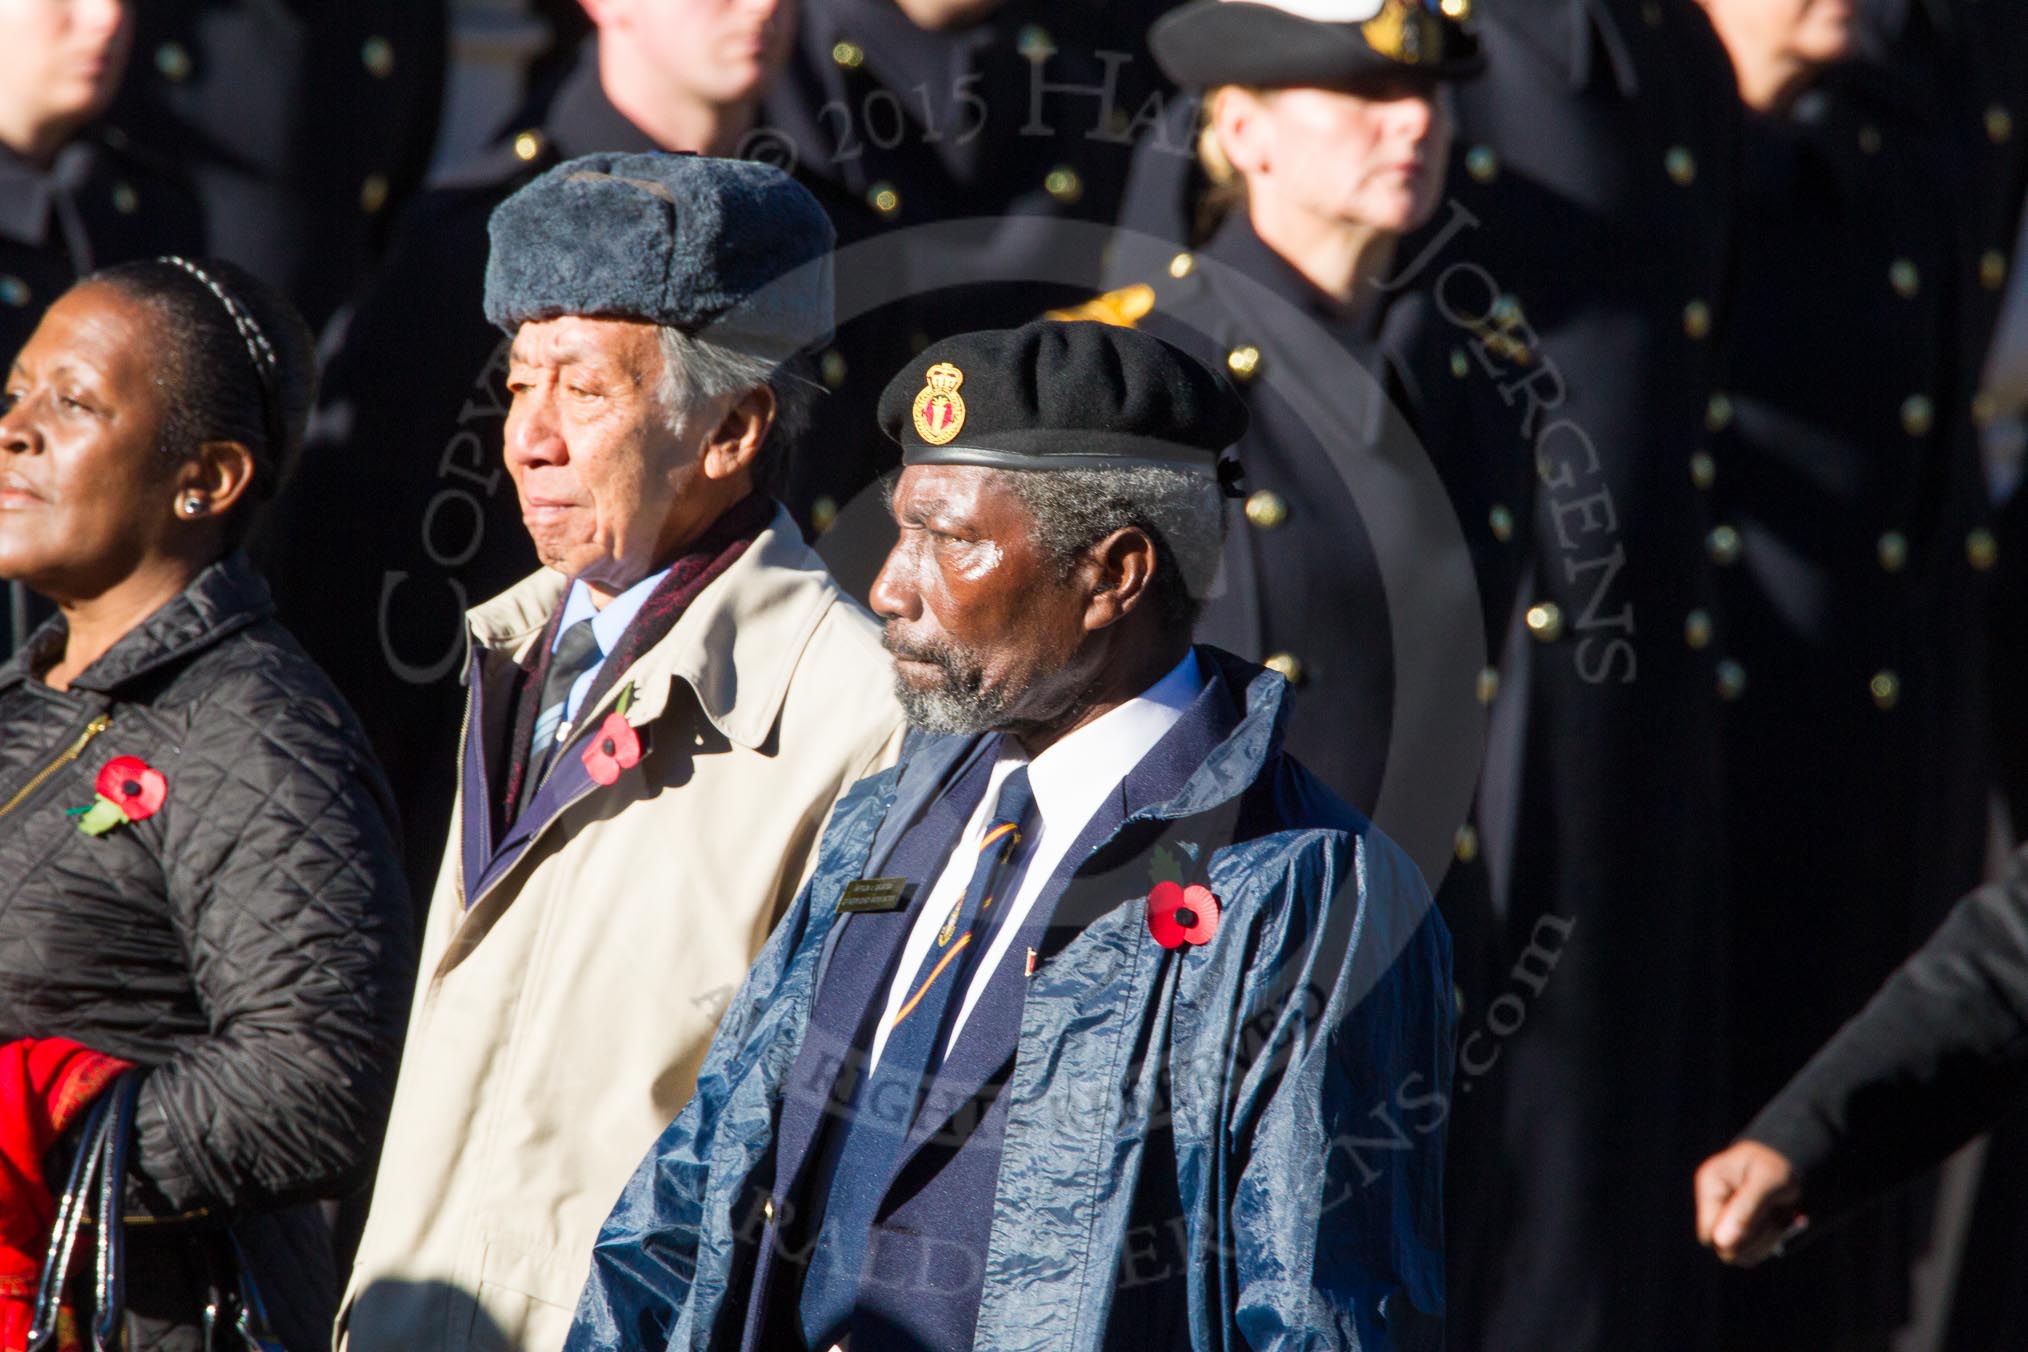 Remembrance Sunday Cenotaph March Past 2013: D3 - West Indian Association of Service Personnel..
Press stand opposite the Foreign Office building, Whitehall, London SW1,
London,
Greater London,
United Kingdom,
on 10 November 2013 at 11:39, image #47